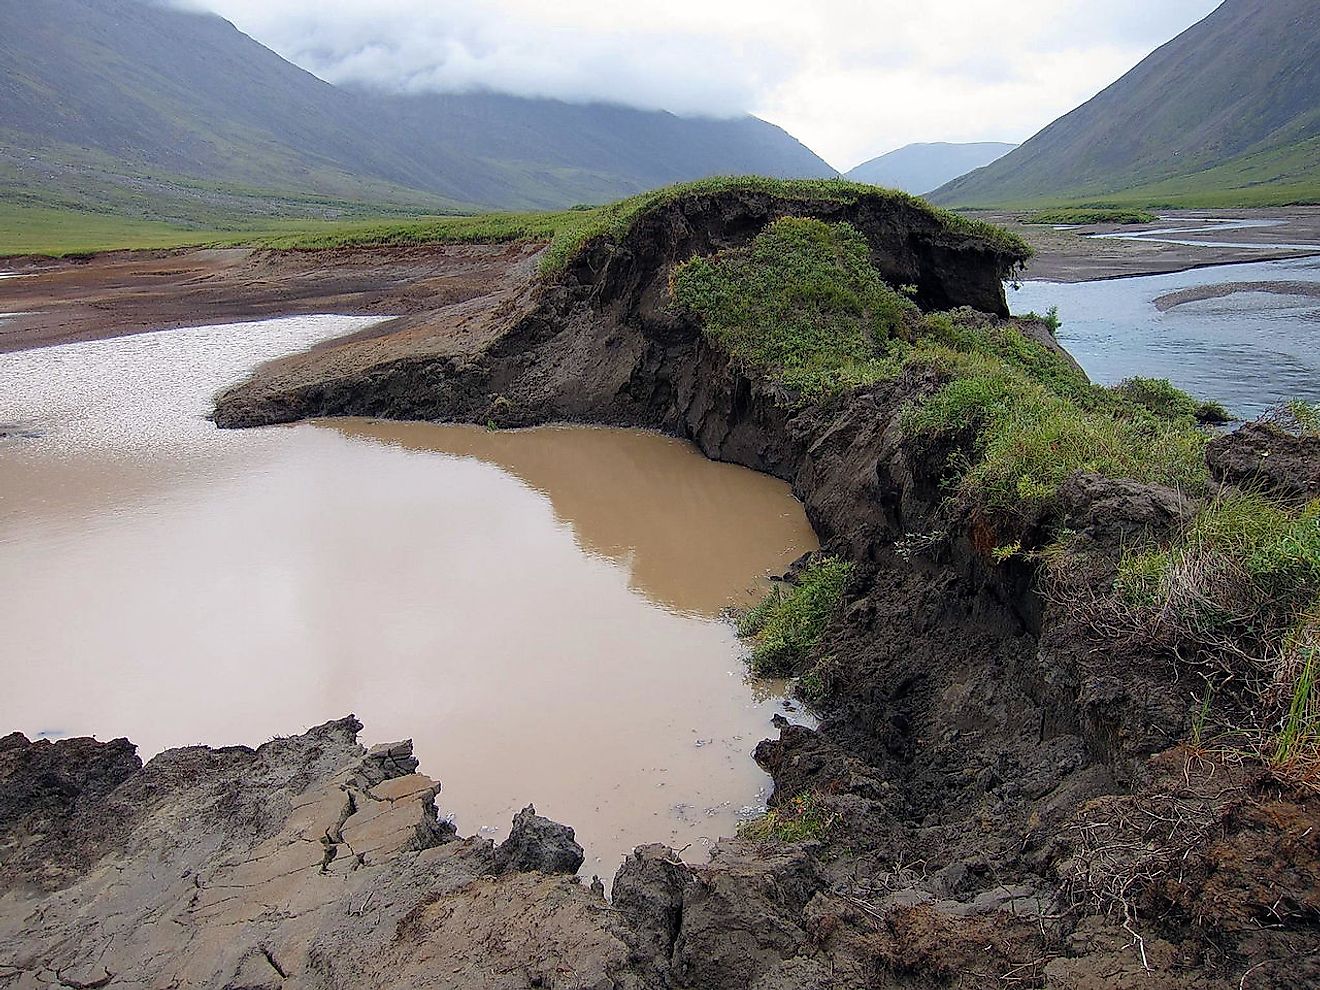 Permafrost is thawing across the Arctic, causing northern lands to sink or change shape. In Gates of the Arctic National Park, a bank of this lake thawed. Image credit: NPS Climate Change Response NPS Photo (C.Ciancibelli)/Public domain 